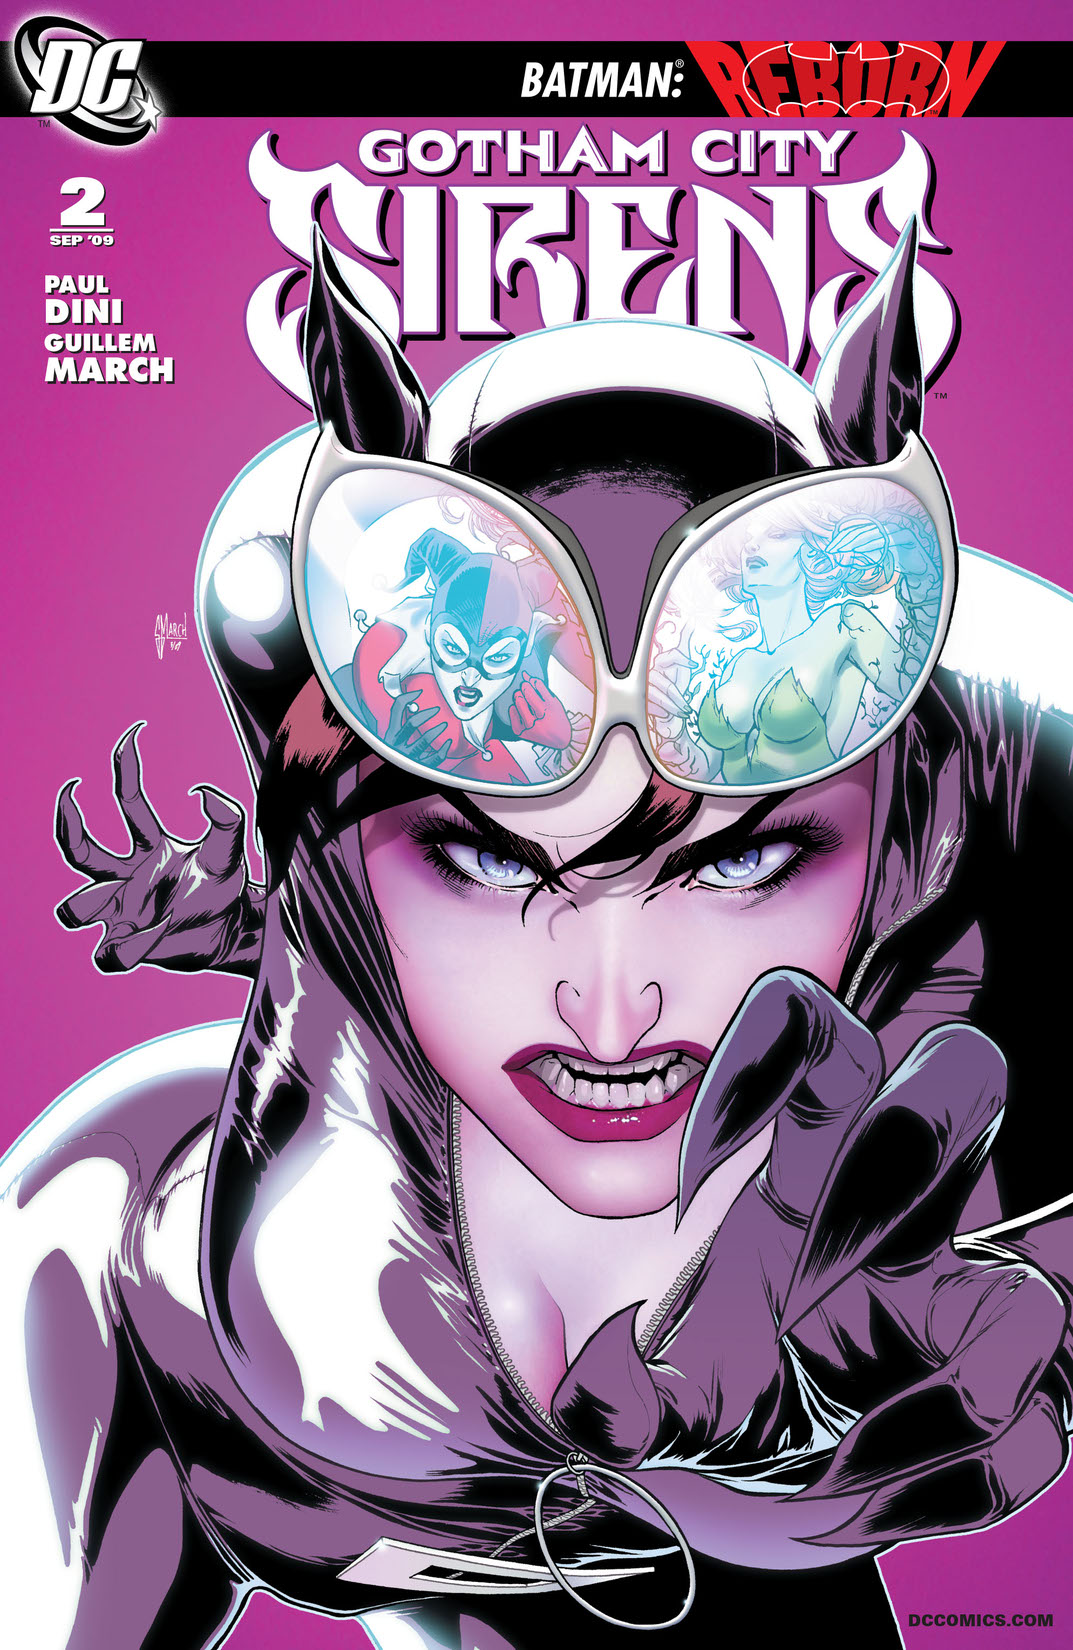 Gotham City Sirens #2 preview images